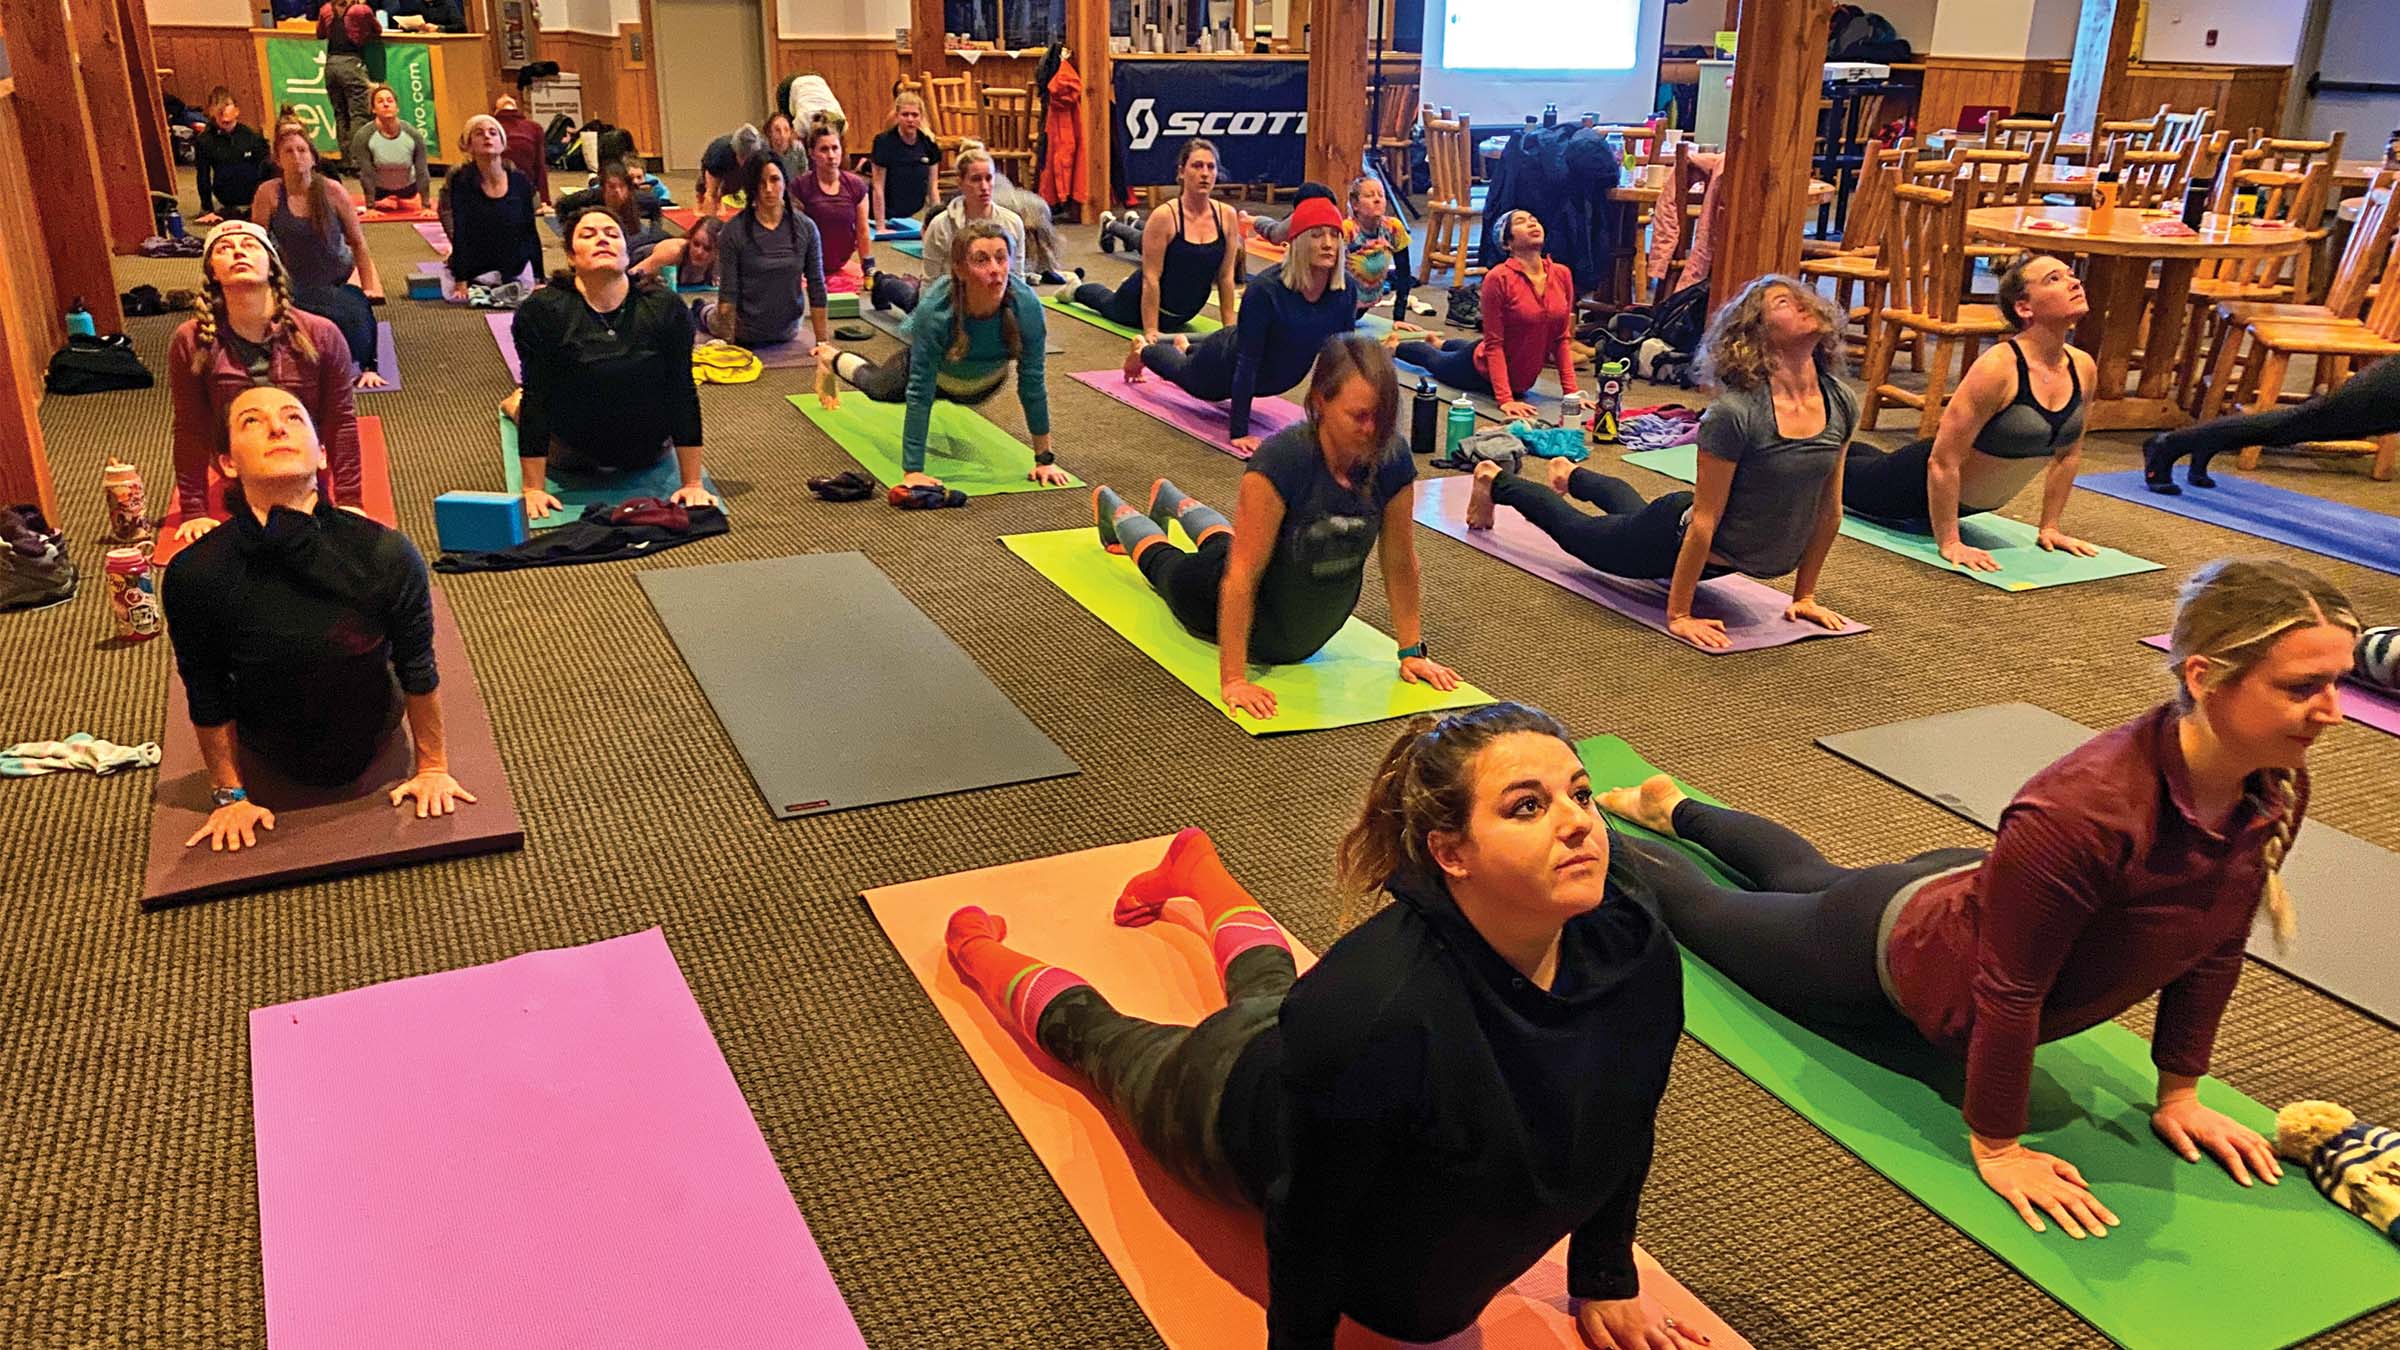 People partaking in Yoga inside Last Chance Lodge at Solitude